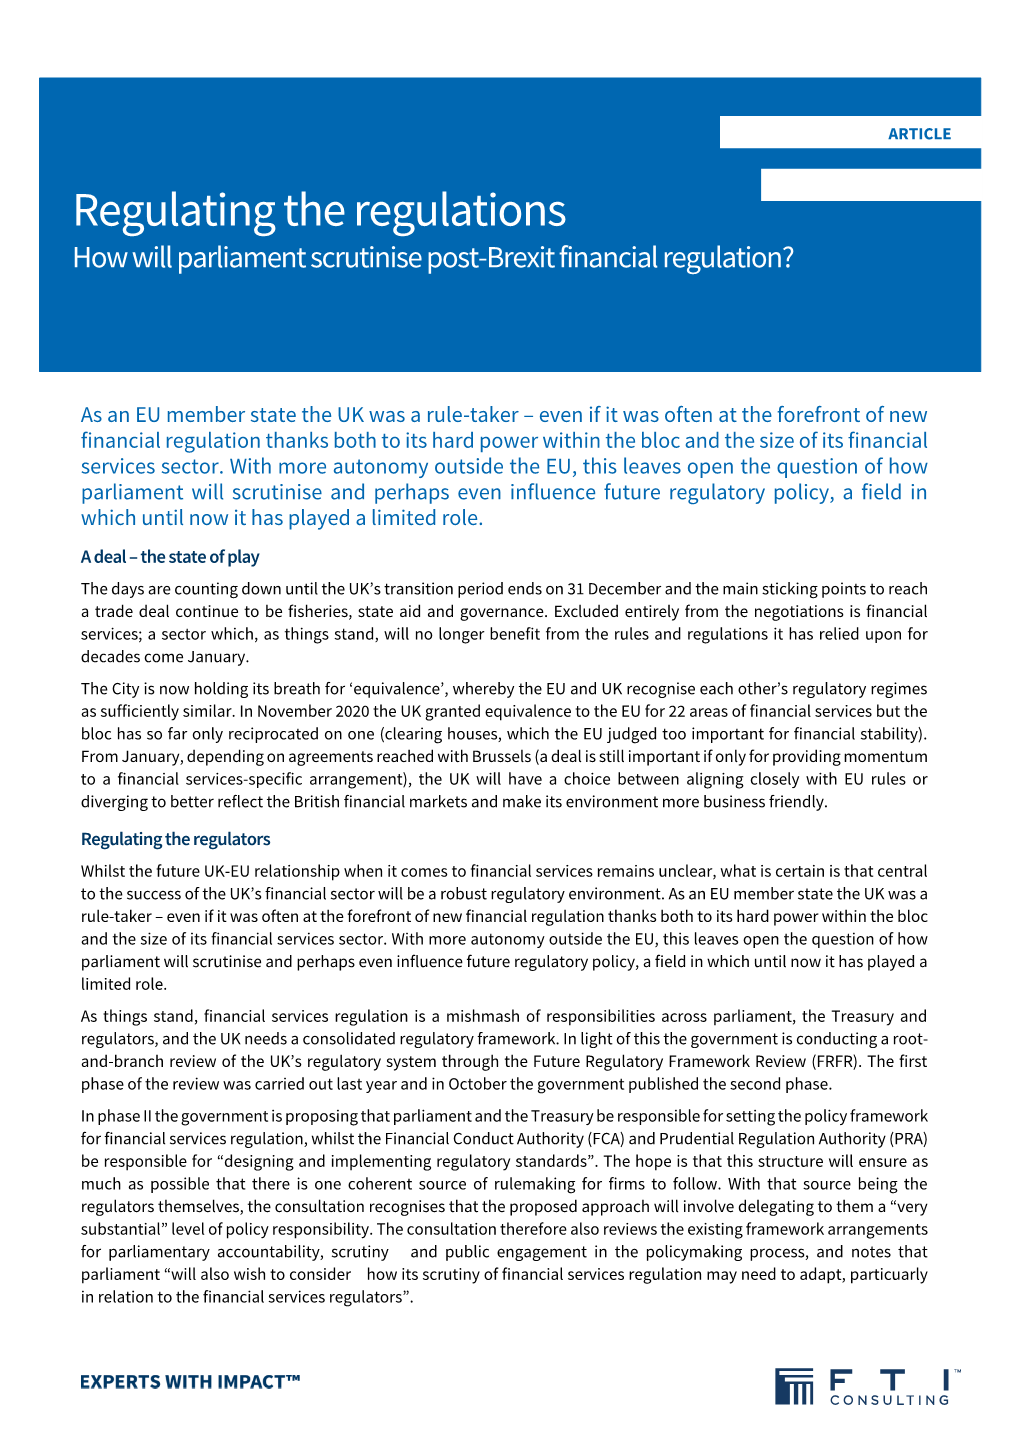 Regulating the Regulations How Will Parliament Scrutinise Post-Brexit Financial Regulation?